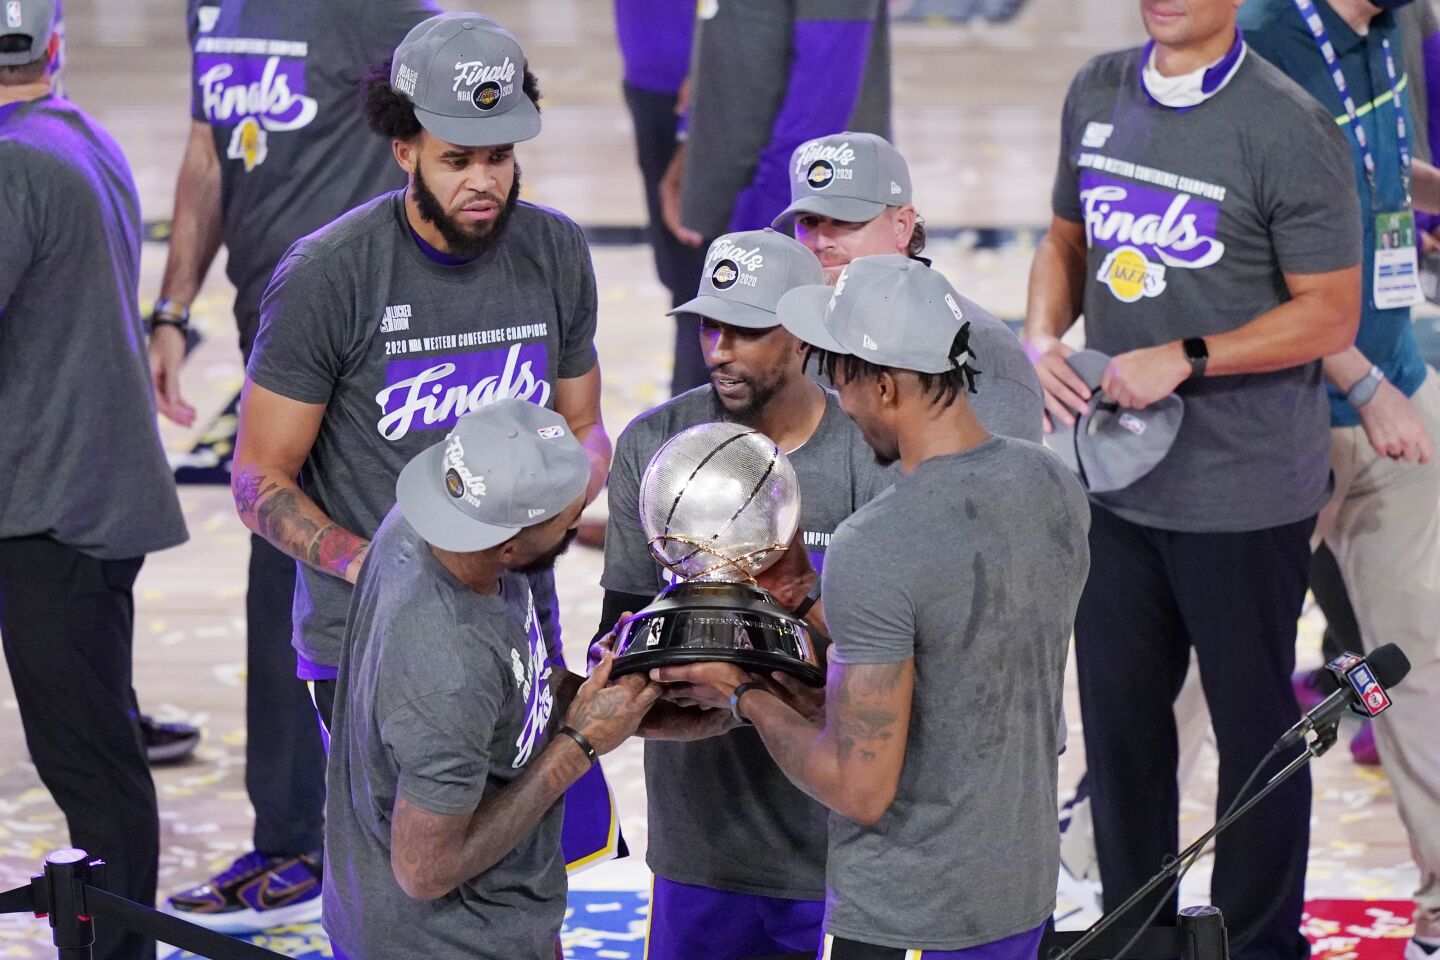 Lakers check out the Western Conference championship trophy after defeating Denver in Game 5.